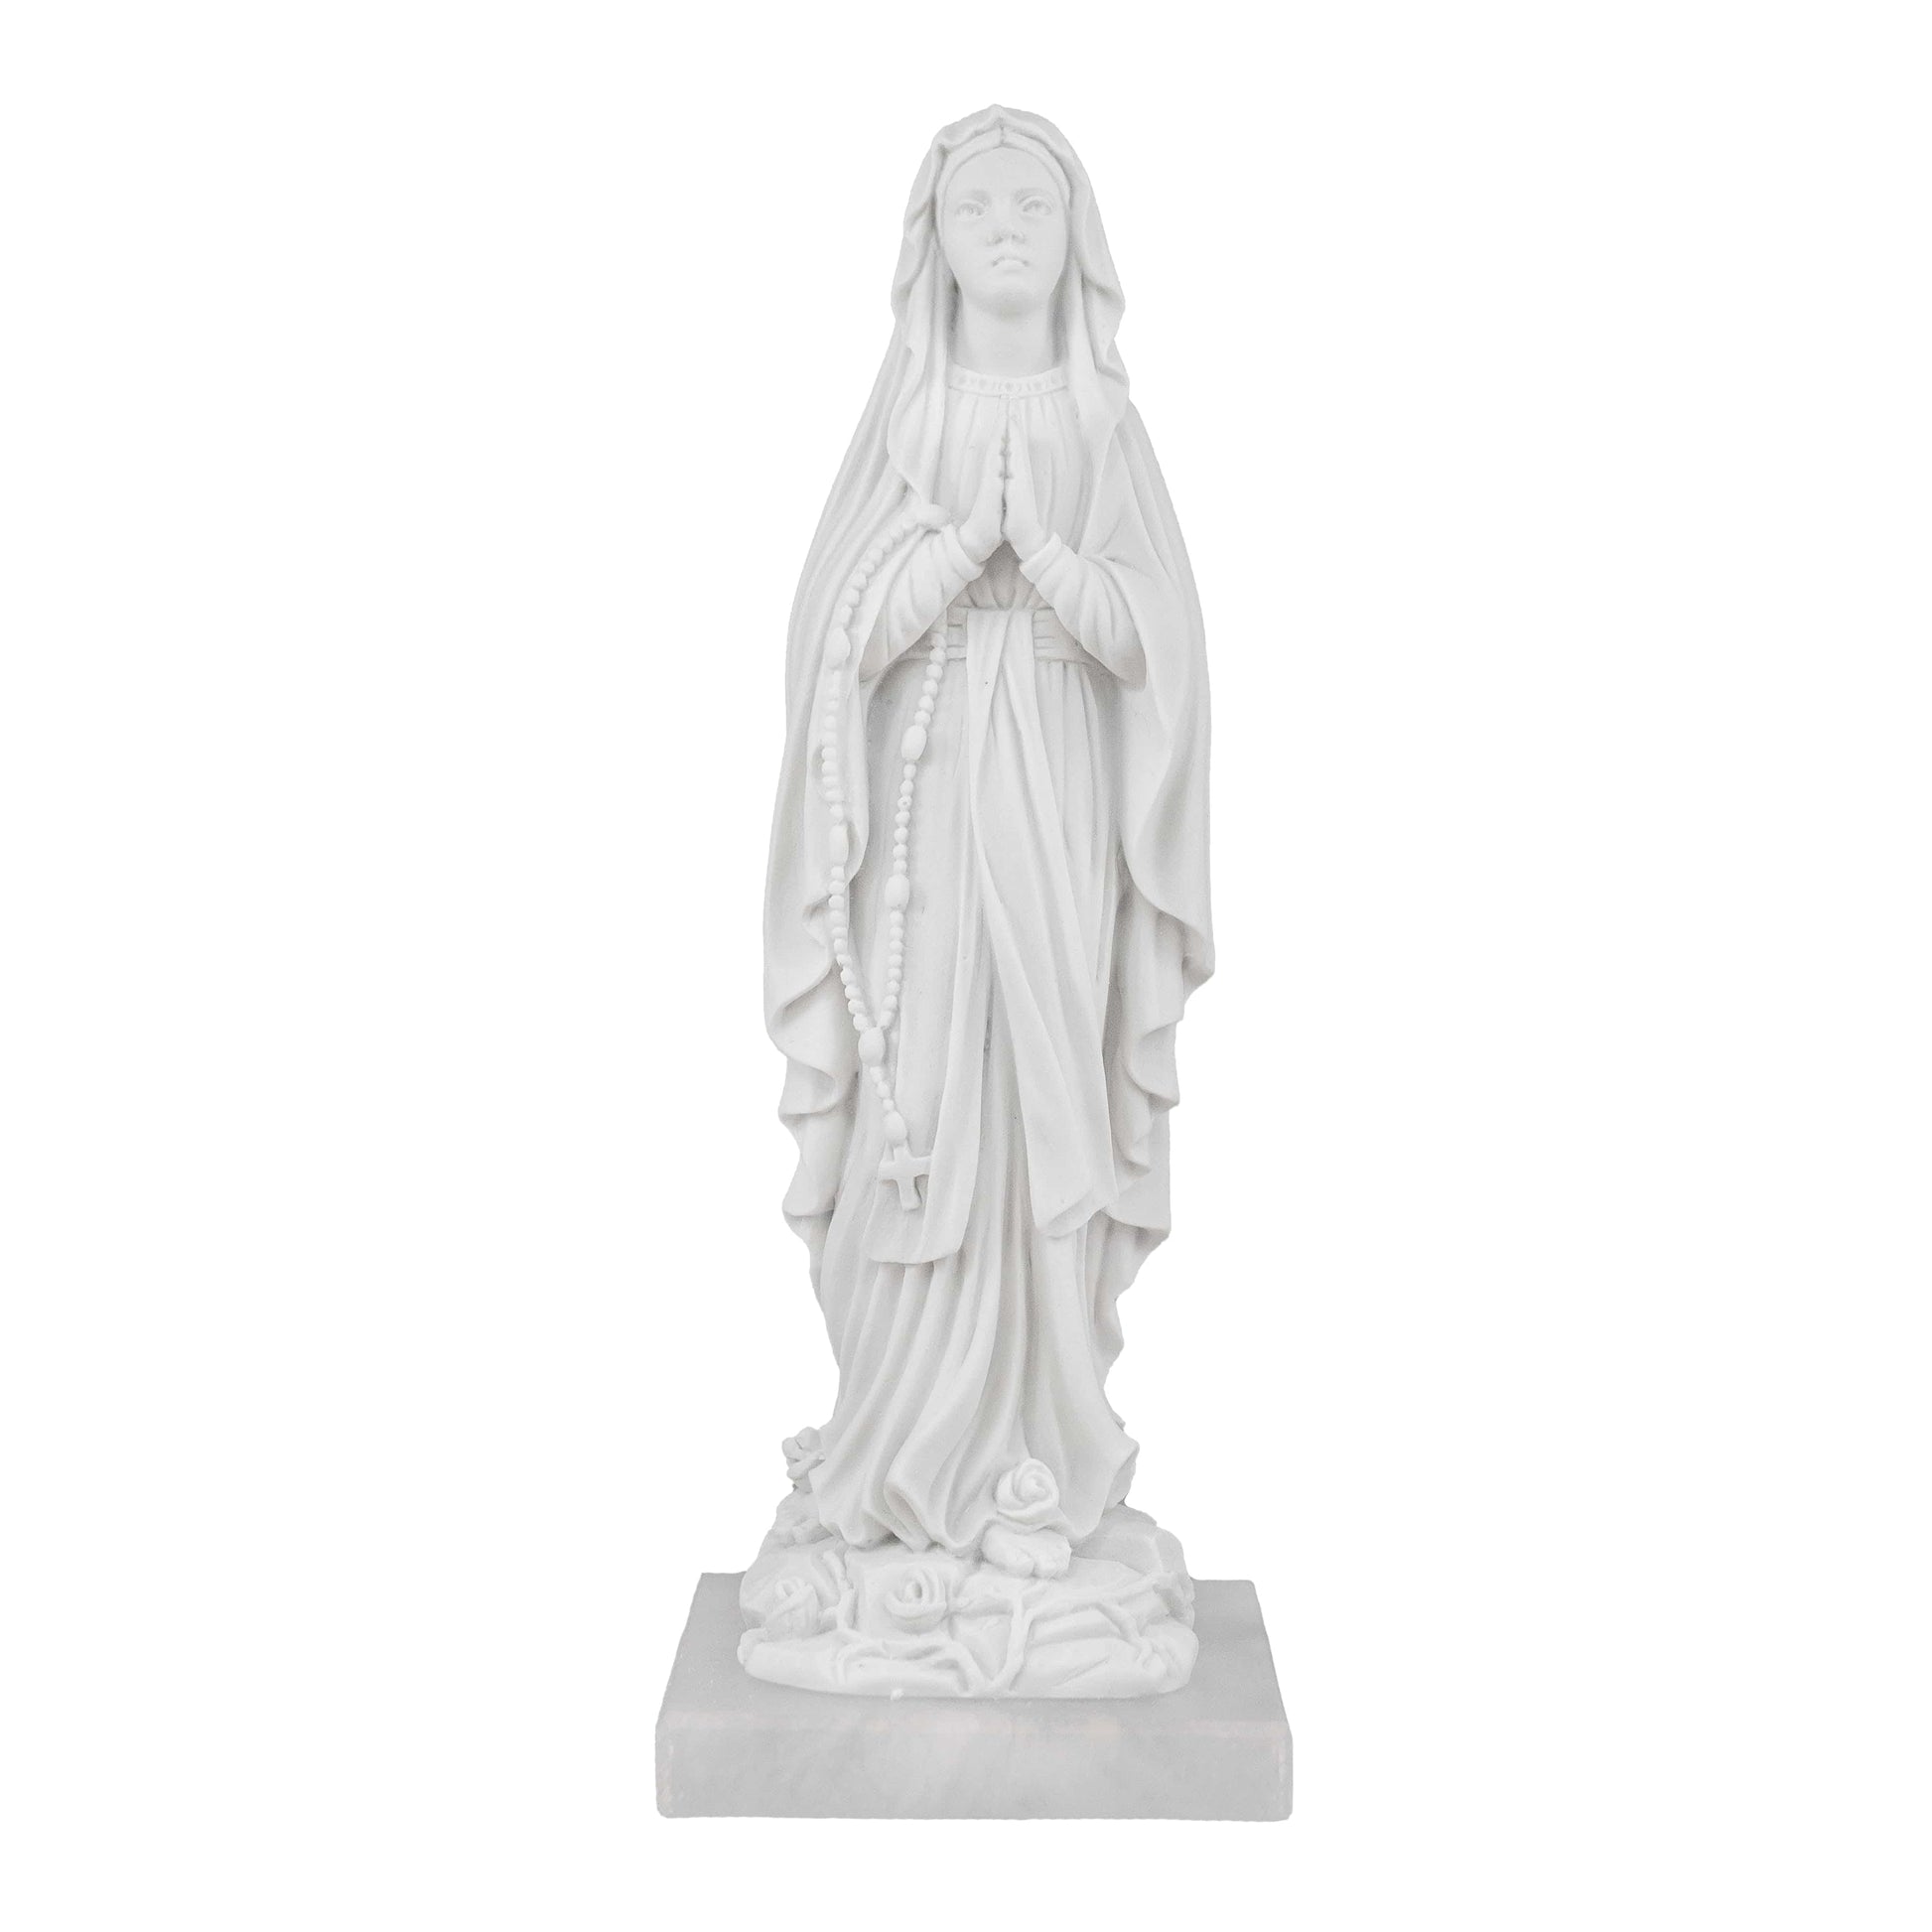 MONDO CATTOLICO 25 cm Our Lady of Lourdes with Roses White Marble Dust